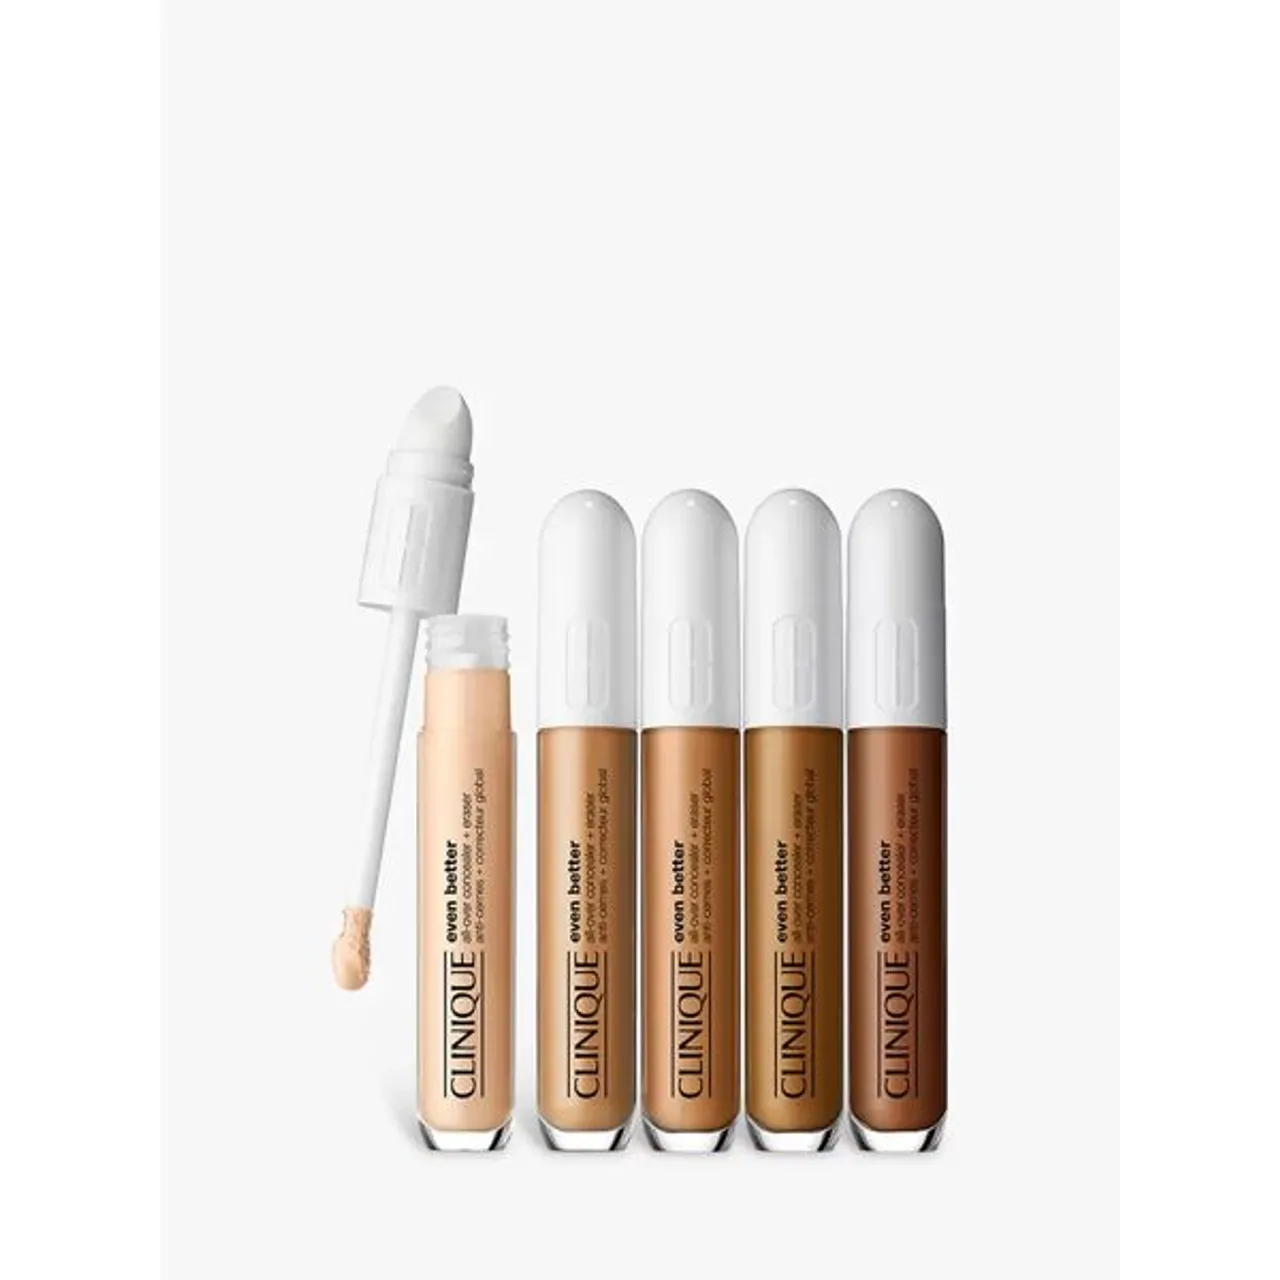 Clinique Even Better All-Over Concealer + Eraser - WN76 Toasted Wheat - Unisex - Size: 6ml